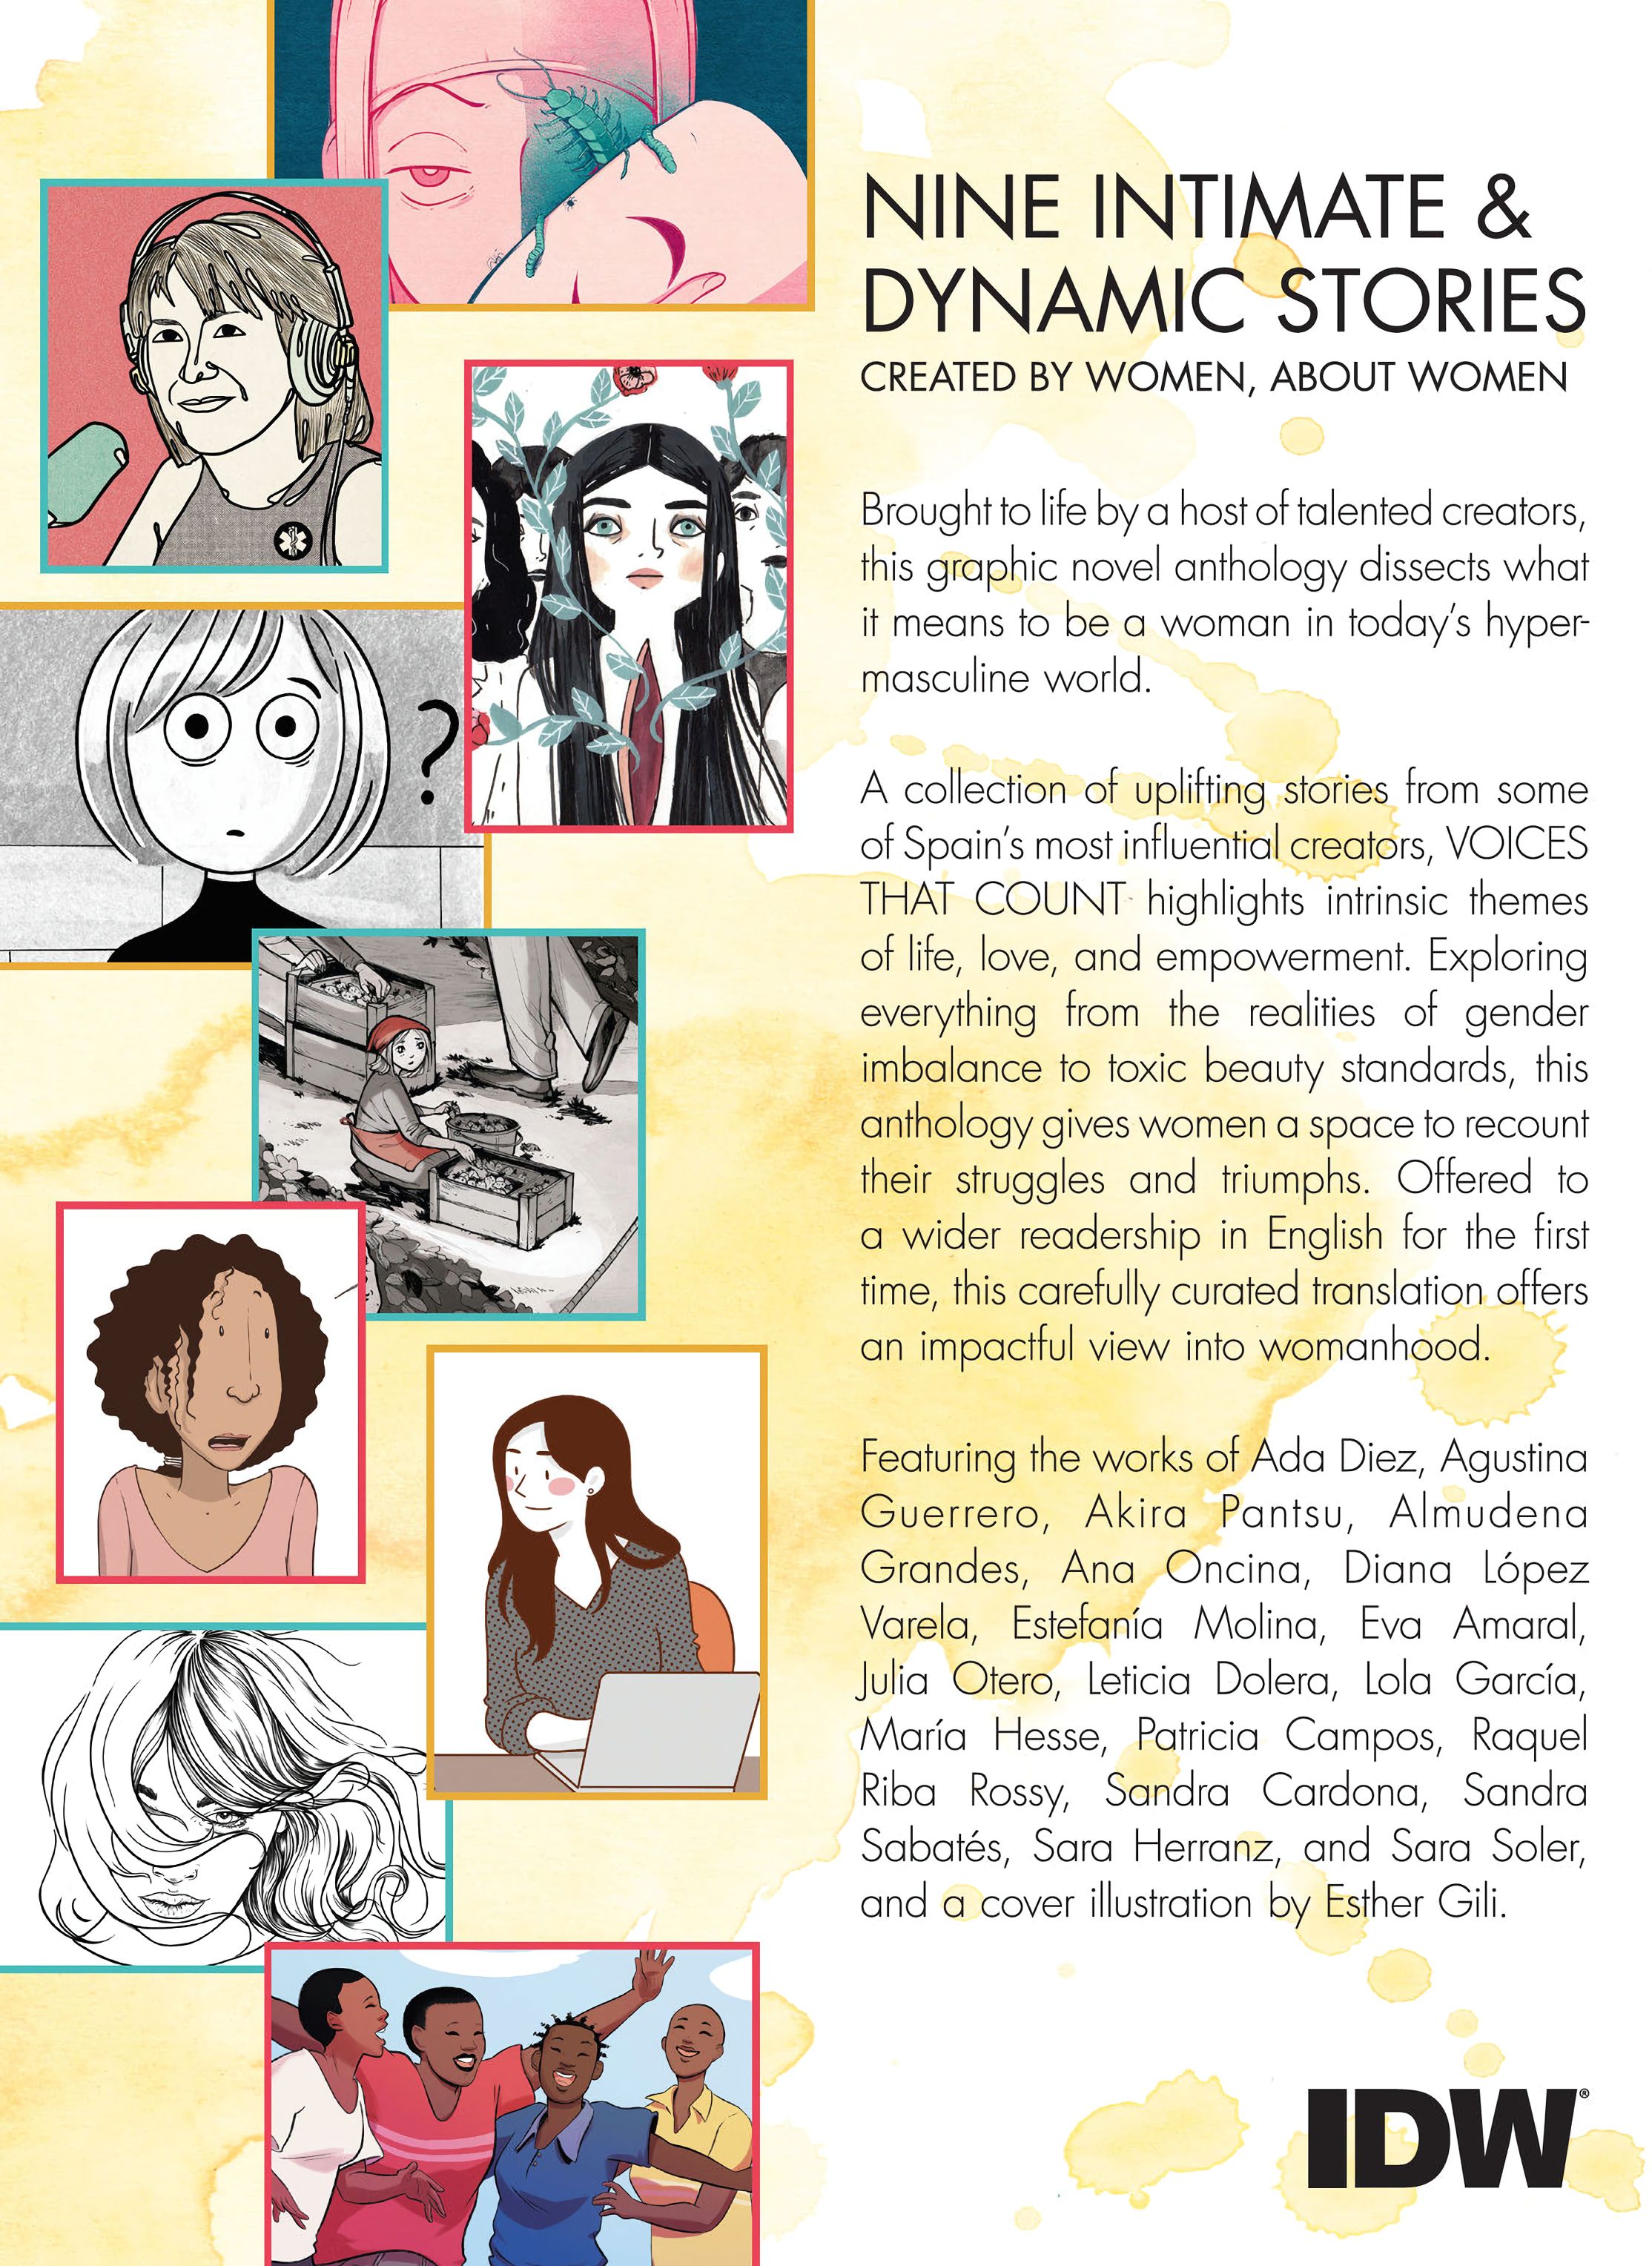 Read online Voices That Count: A Comics Anthology by Women comic -  Issue # TPB - 111